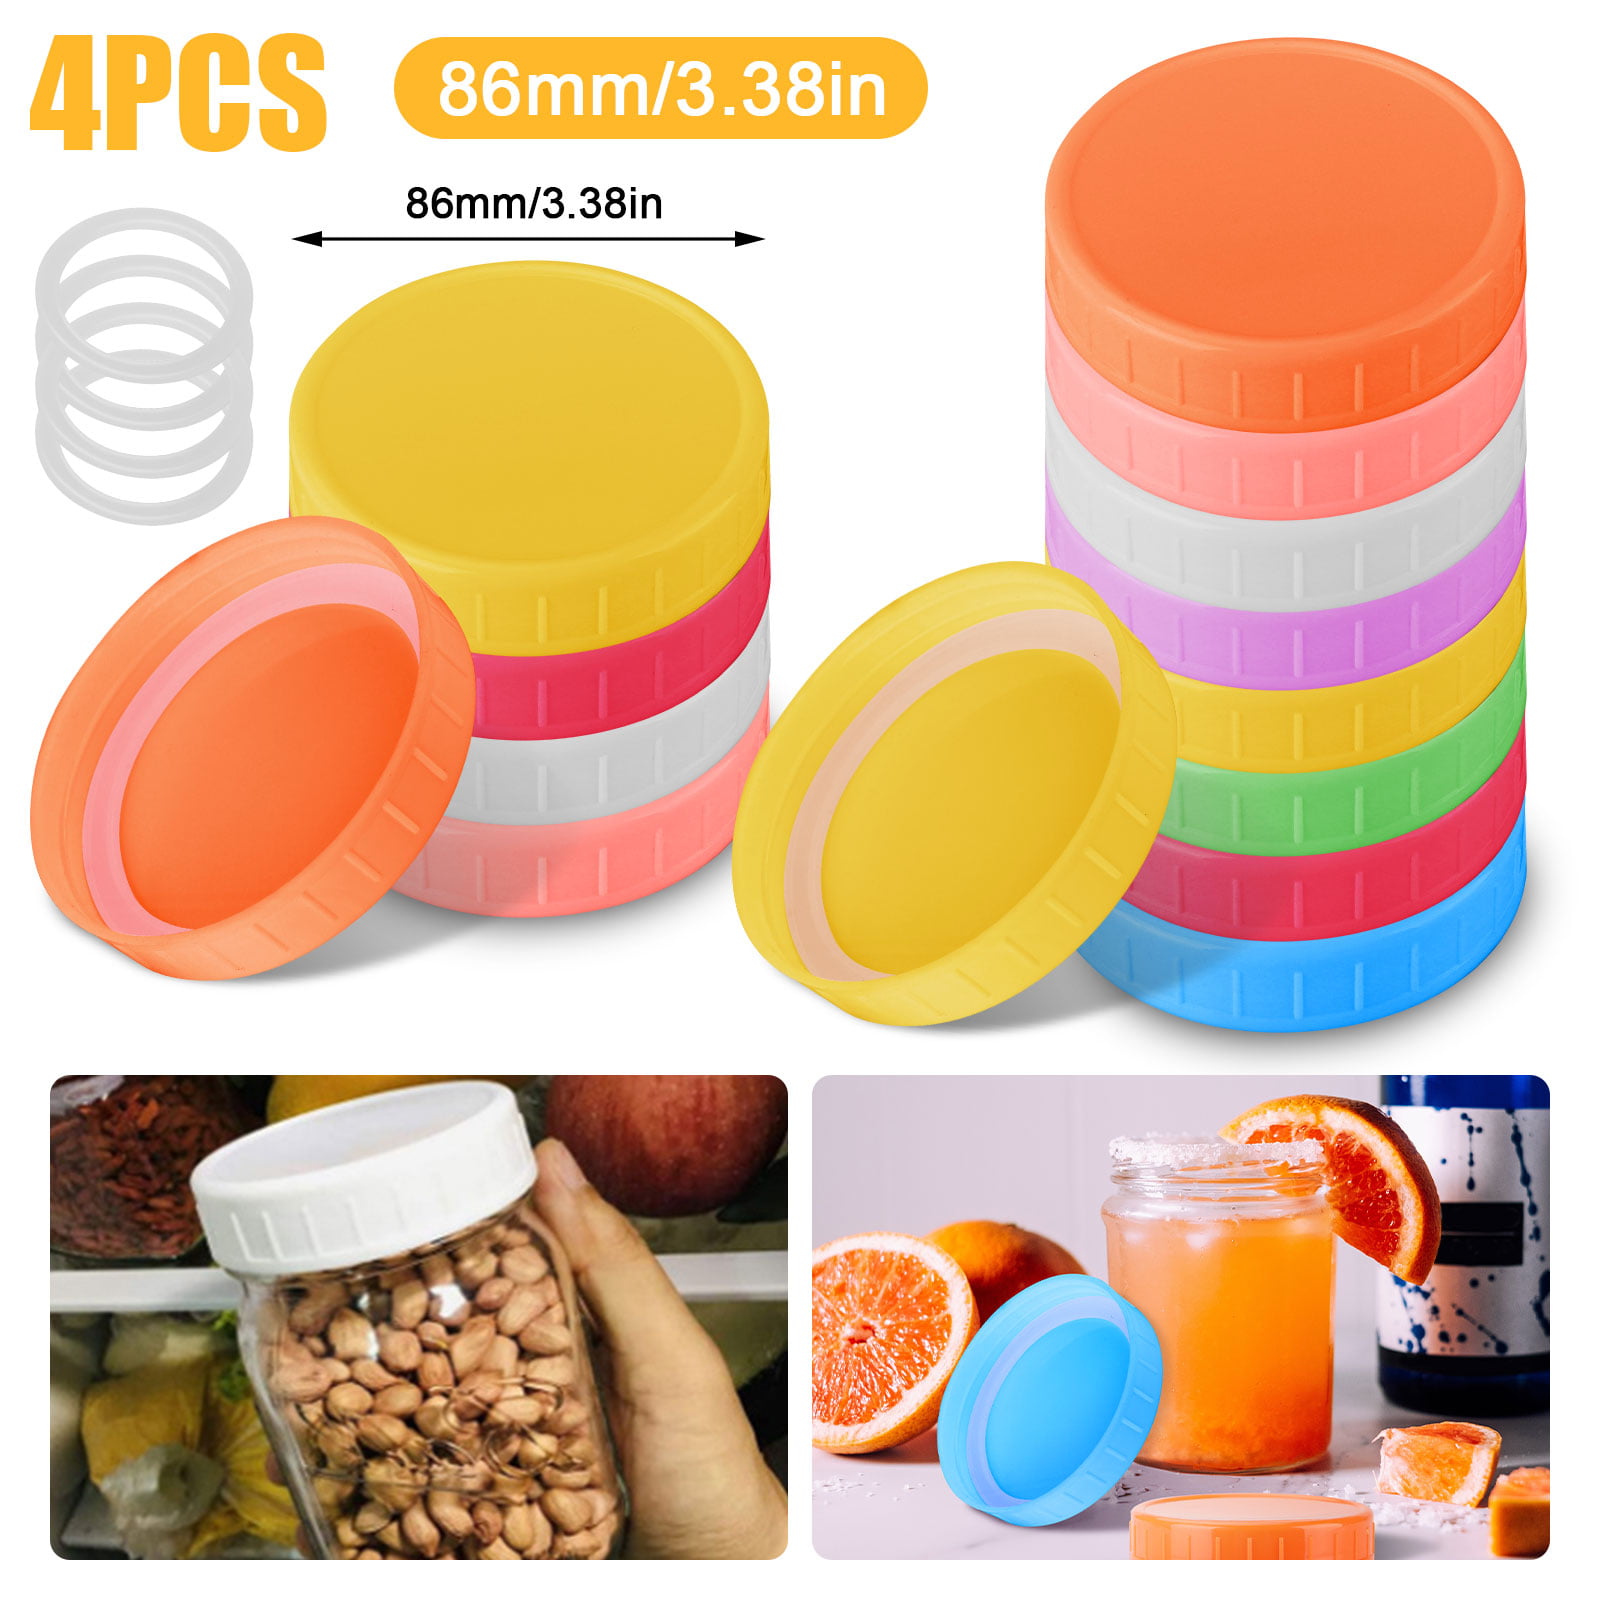 4 Plastic Caps Seal Lids w/Silicone Seal Rings for Wide/Regular Mason Jar Bottle 